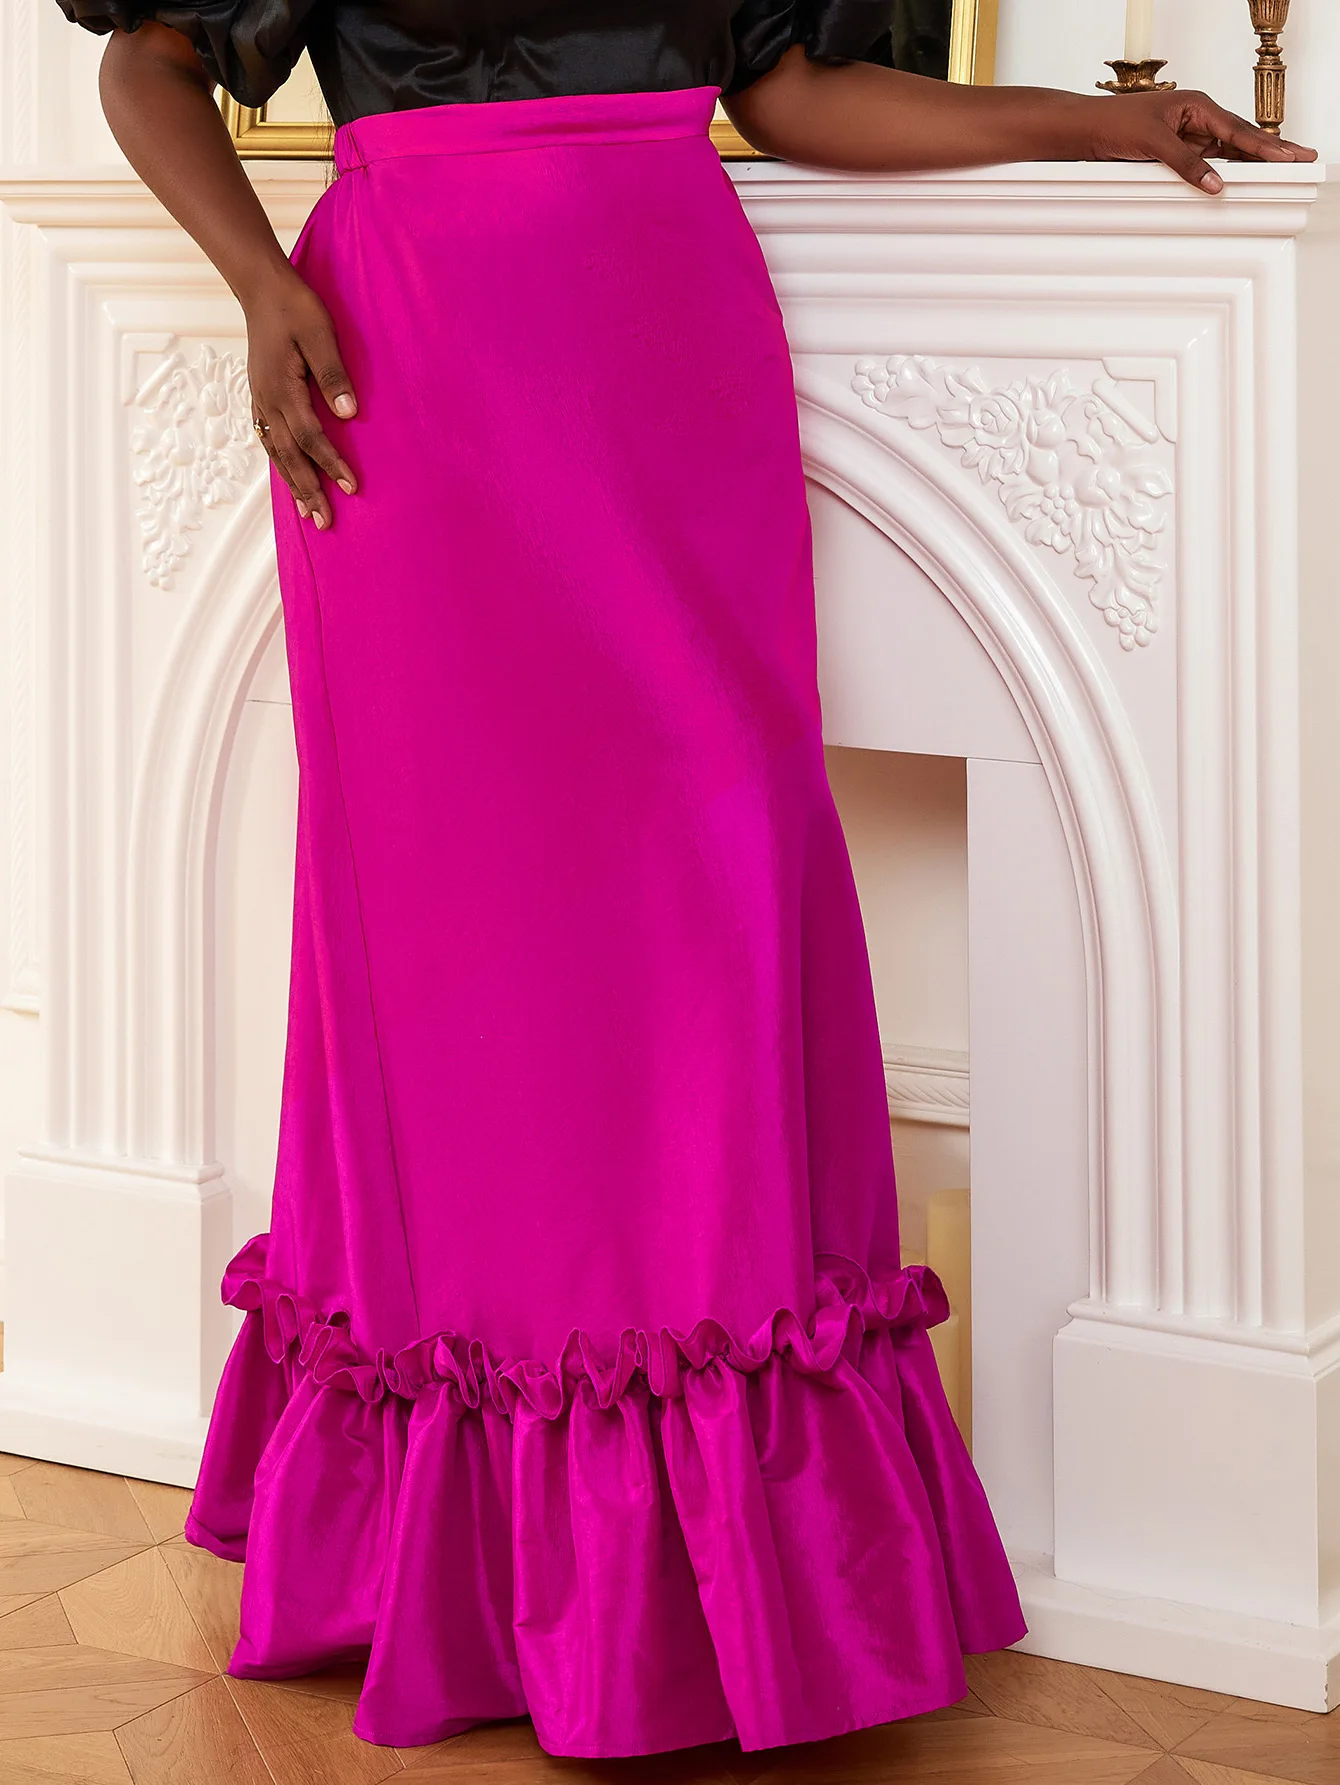 Fuchsia Long Skirts High Waist Shiny Loose Evening Party Cocktail Large Size Ruffles Floor Length Skirt for Ladies 3XL 4XL 2024 off shoulder maternity robes for photo shoot riered ruffles a line tulle pregnant women dresses floor length babyshower dresses